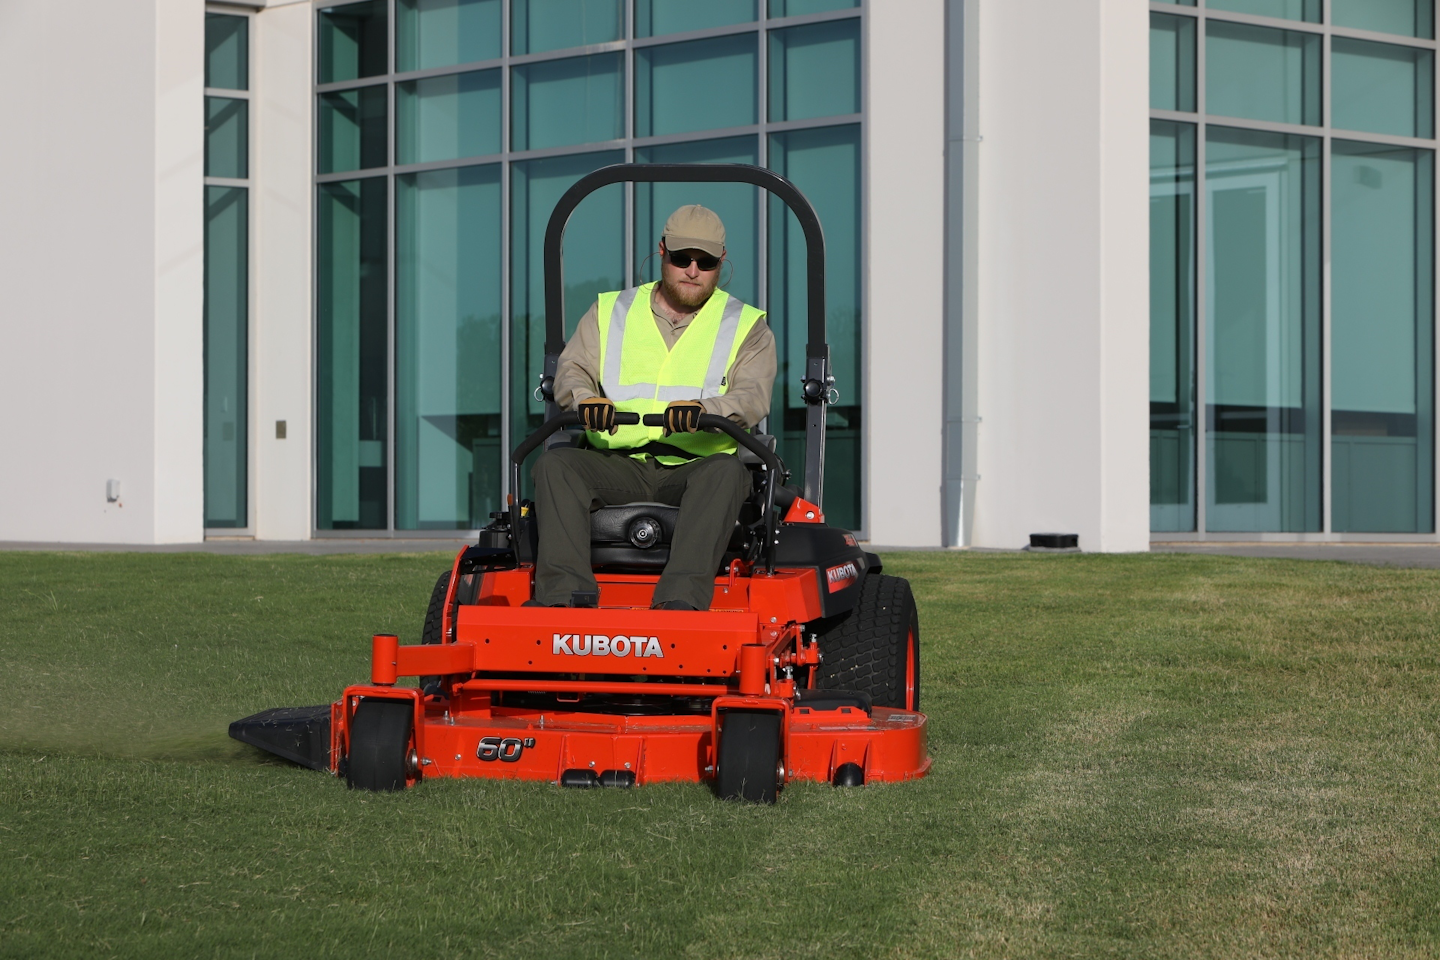 Kubota debuts two new commercial mowers for December 2017 Total